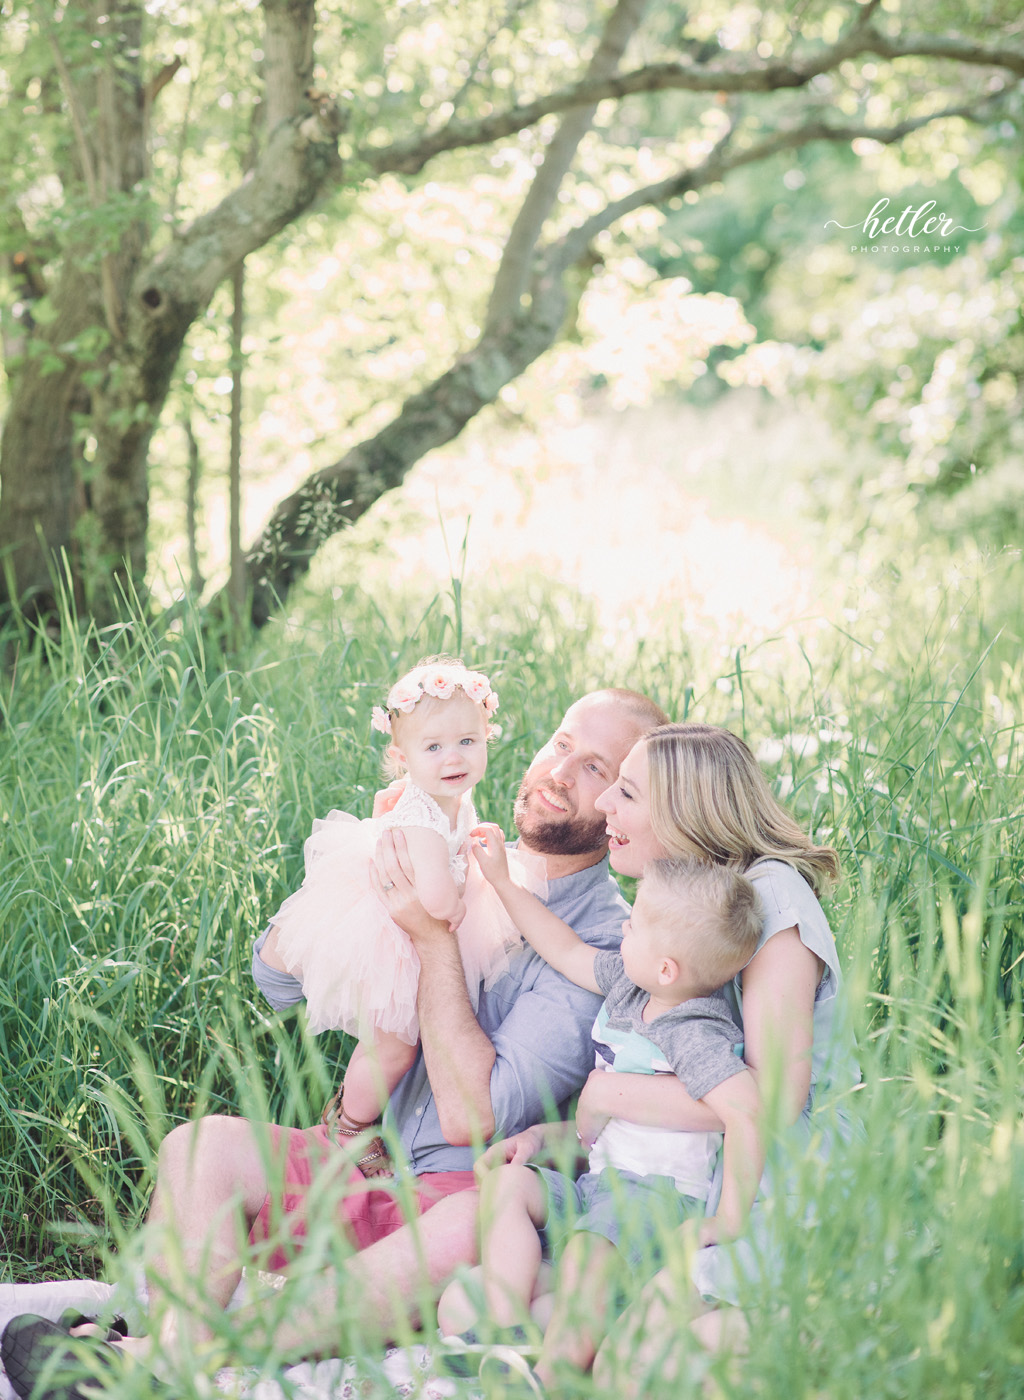 Grand Rapids family photography with girl with lucky fins